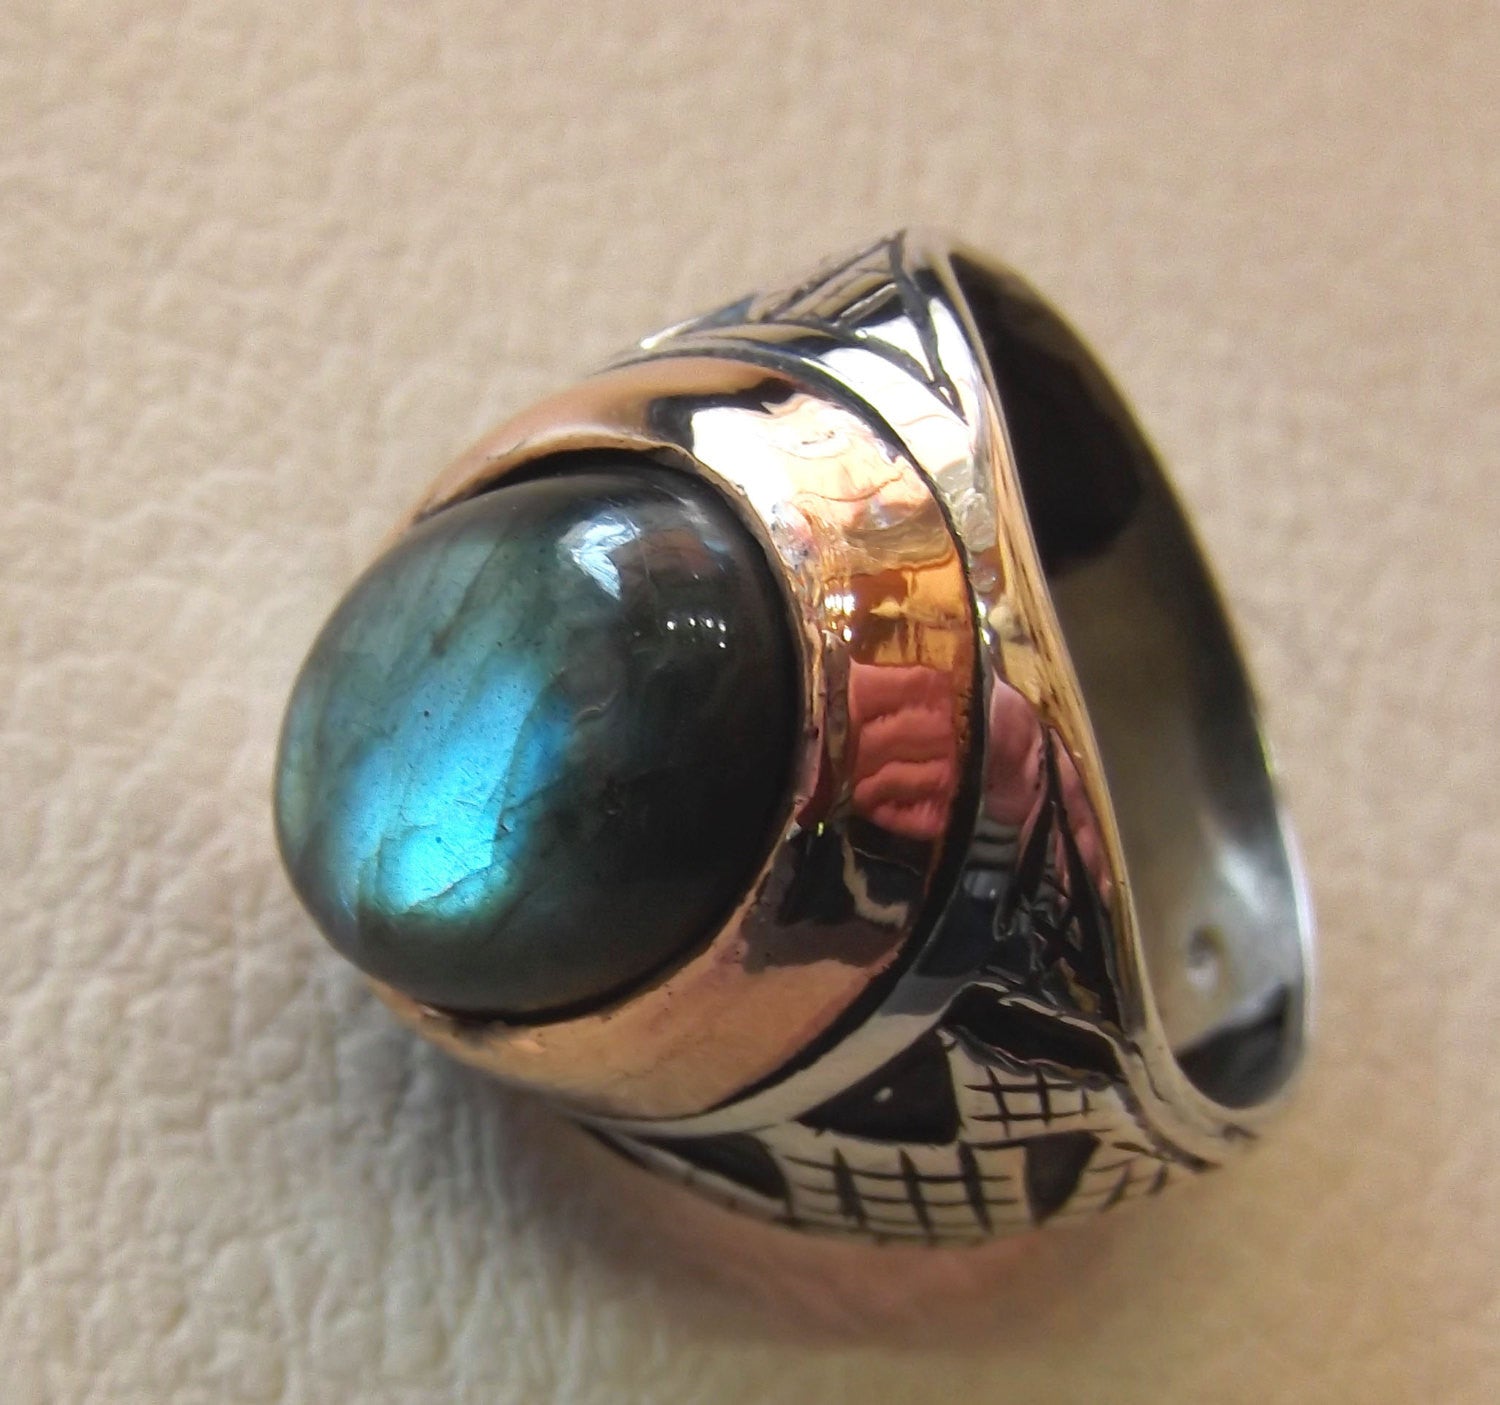 Labradorite natural stone multi color semi precious stone heavy man ring sterling silver 925 bronze frame any sizes jewelry express shipping